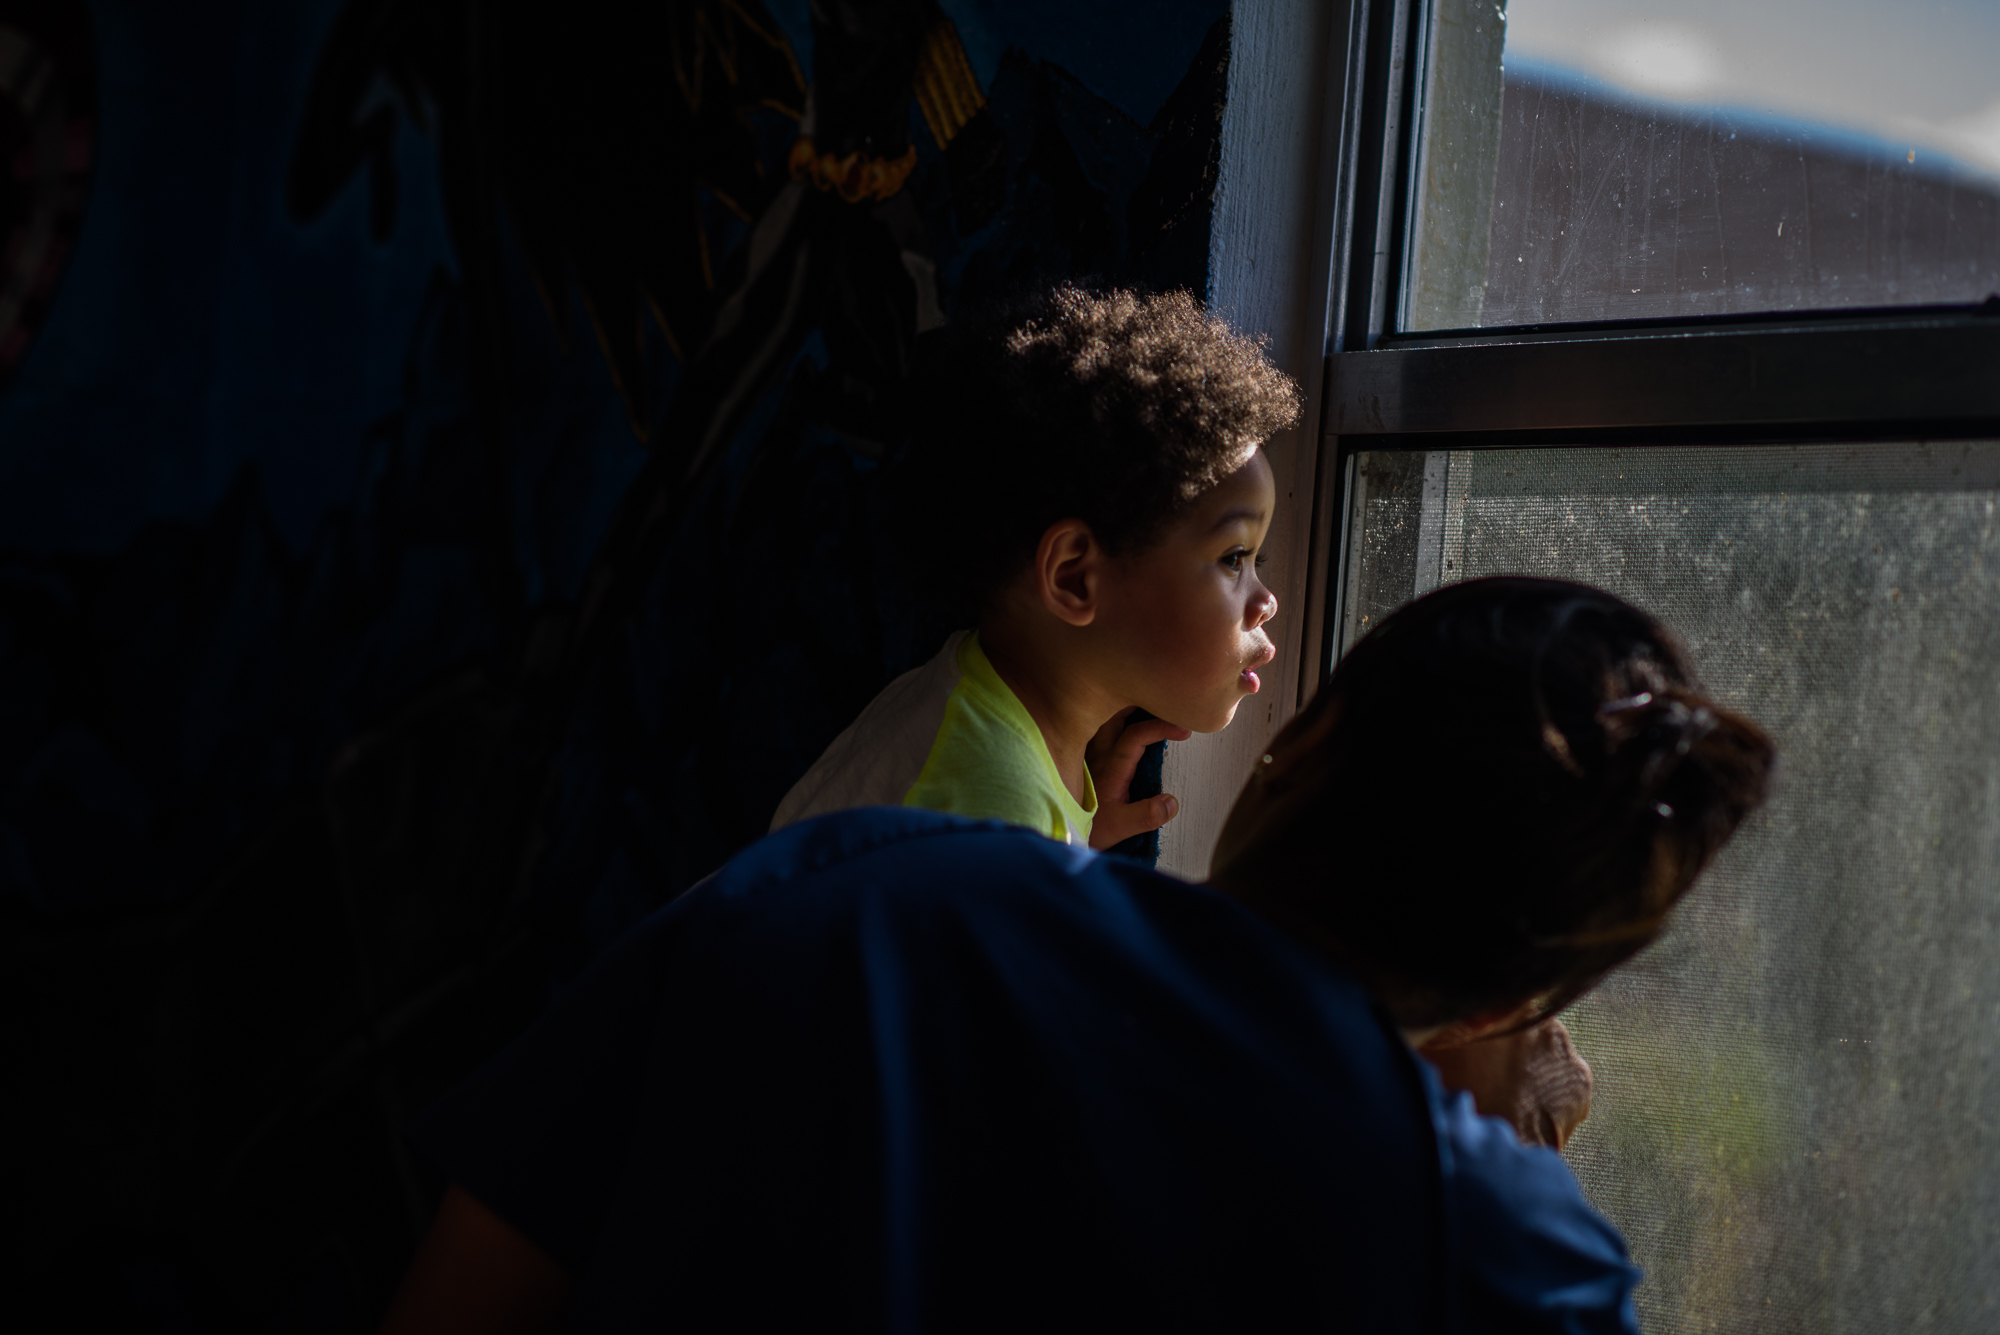  A boy looks out the window with his grandmother at the Homestead Correctional Institution. 